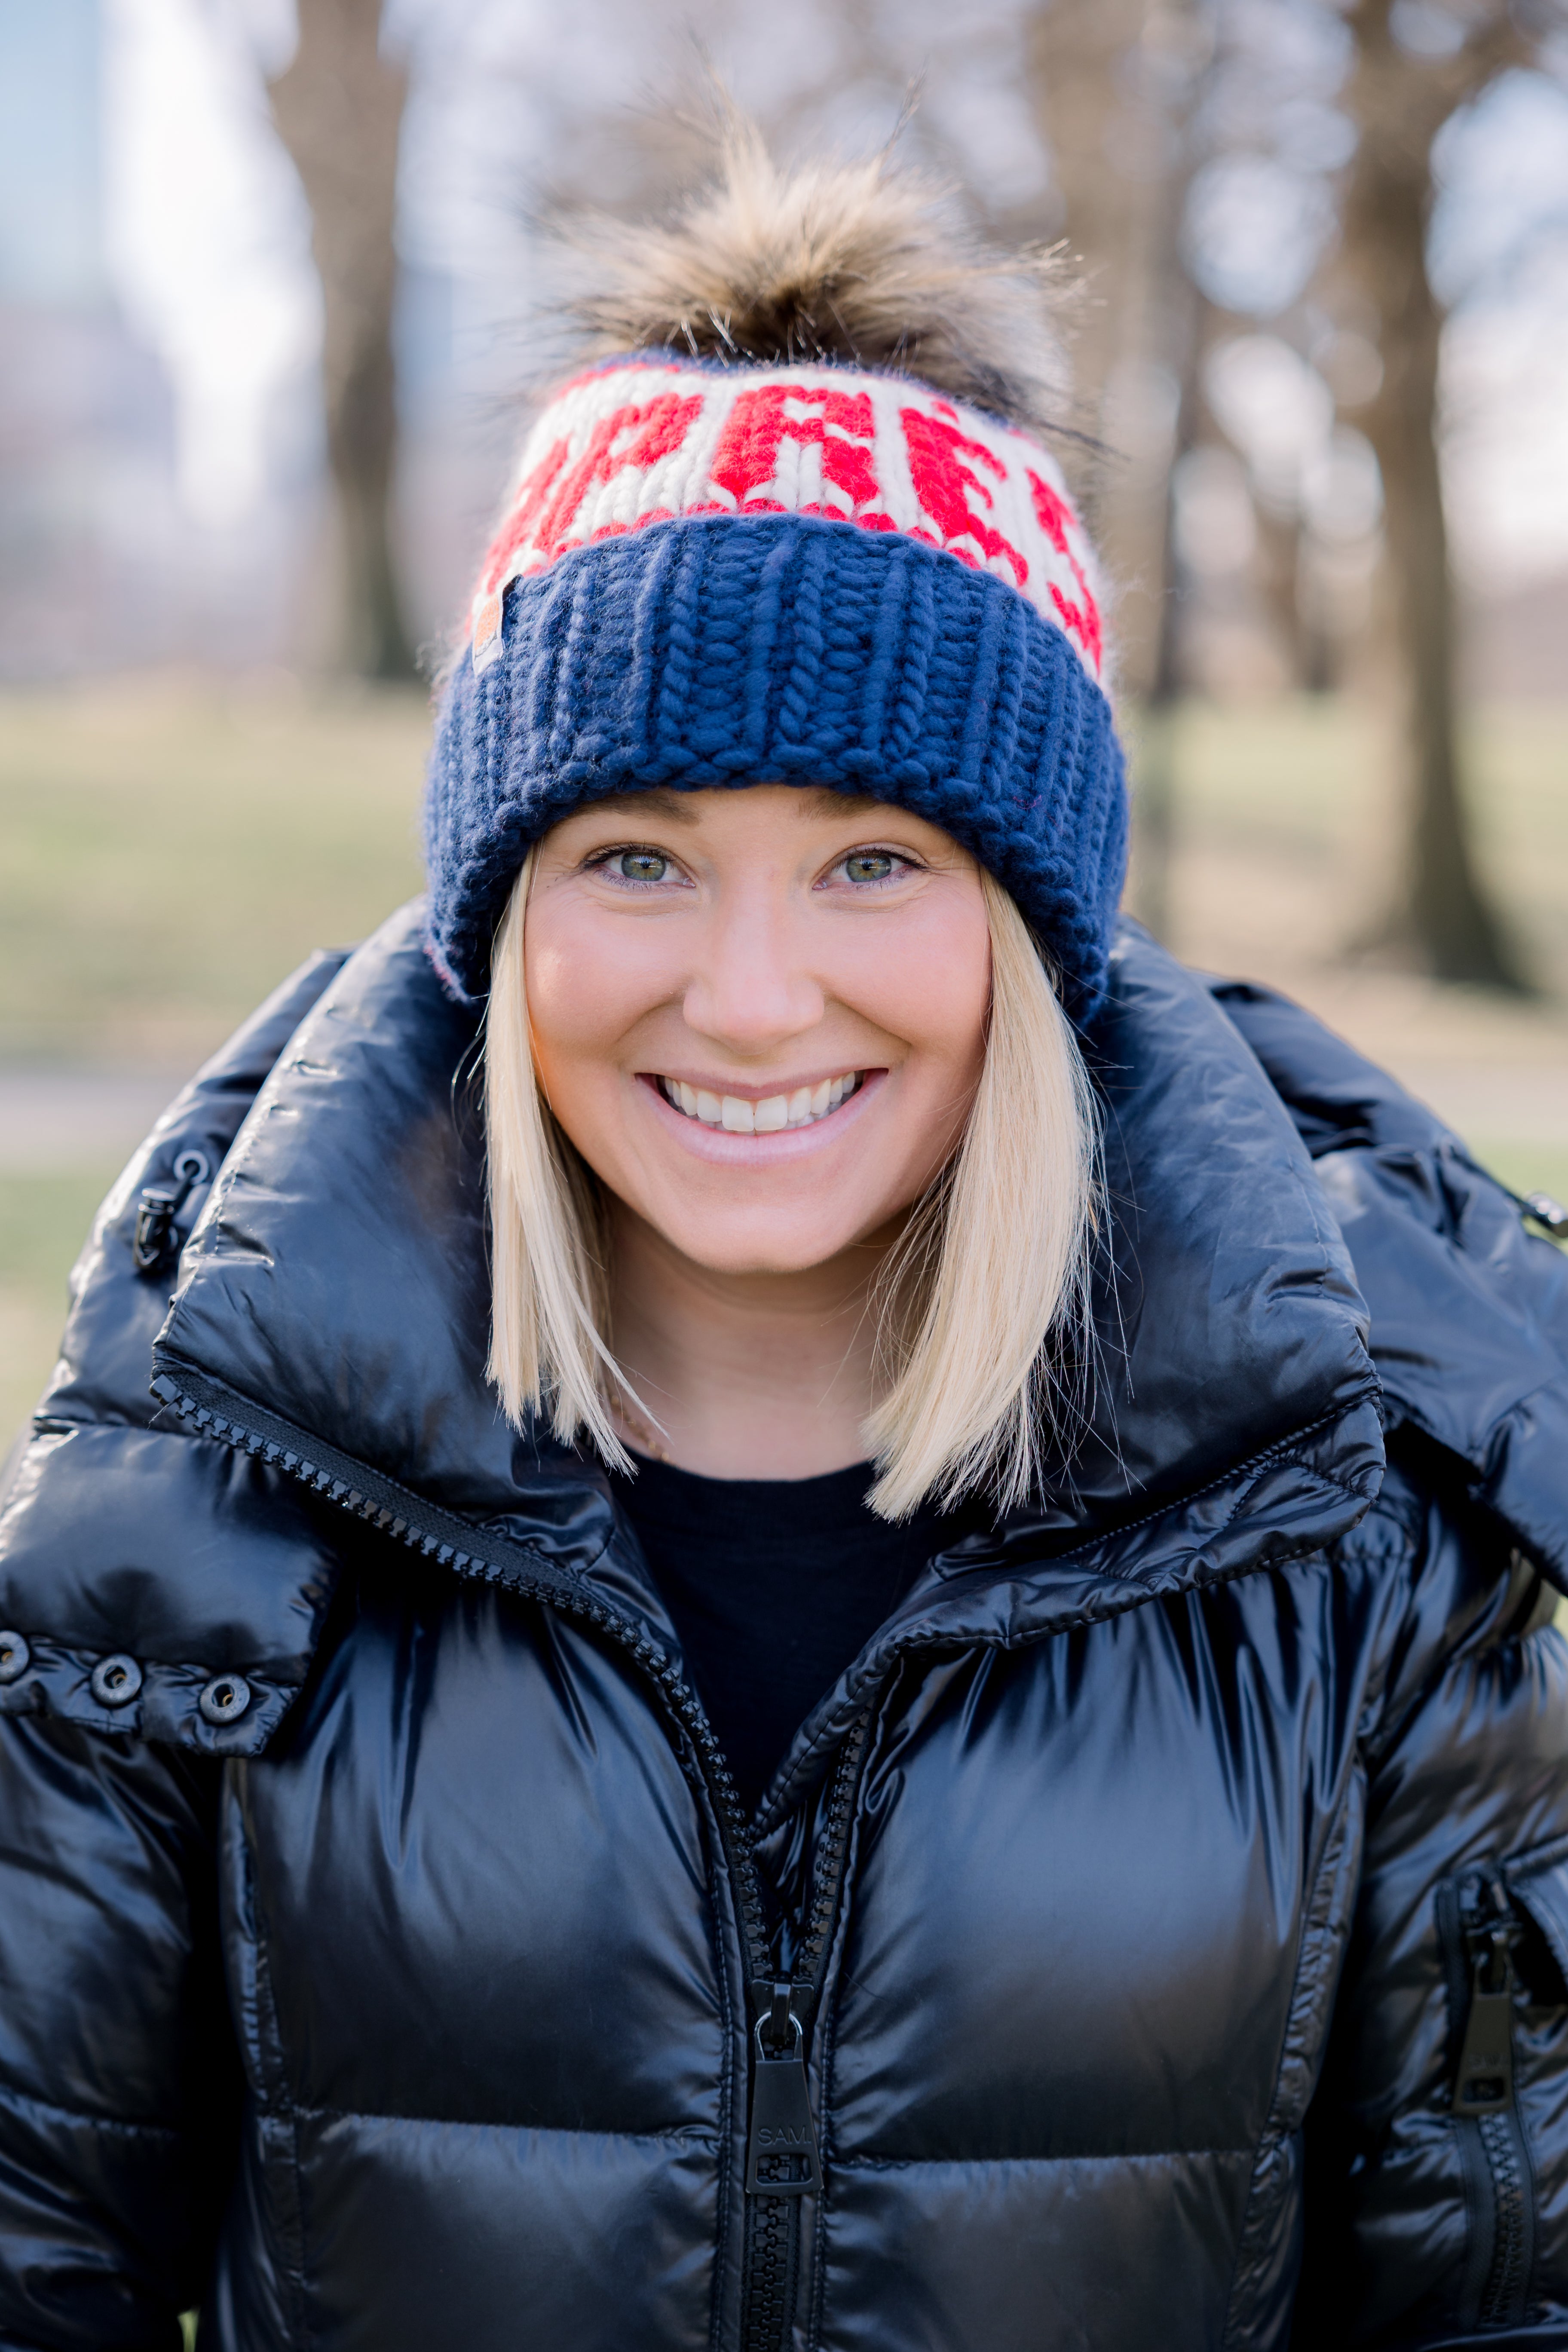 The Apres Beanie in Red, White and Blue